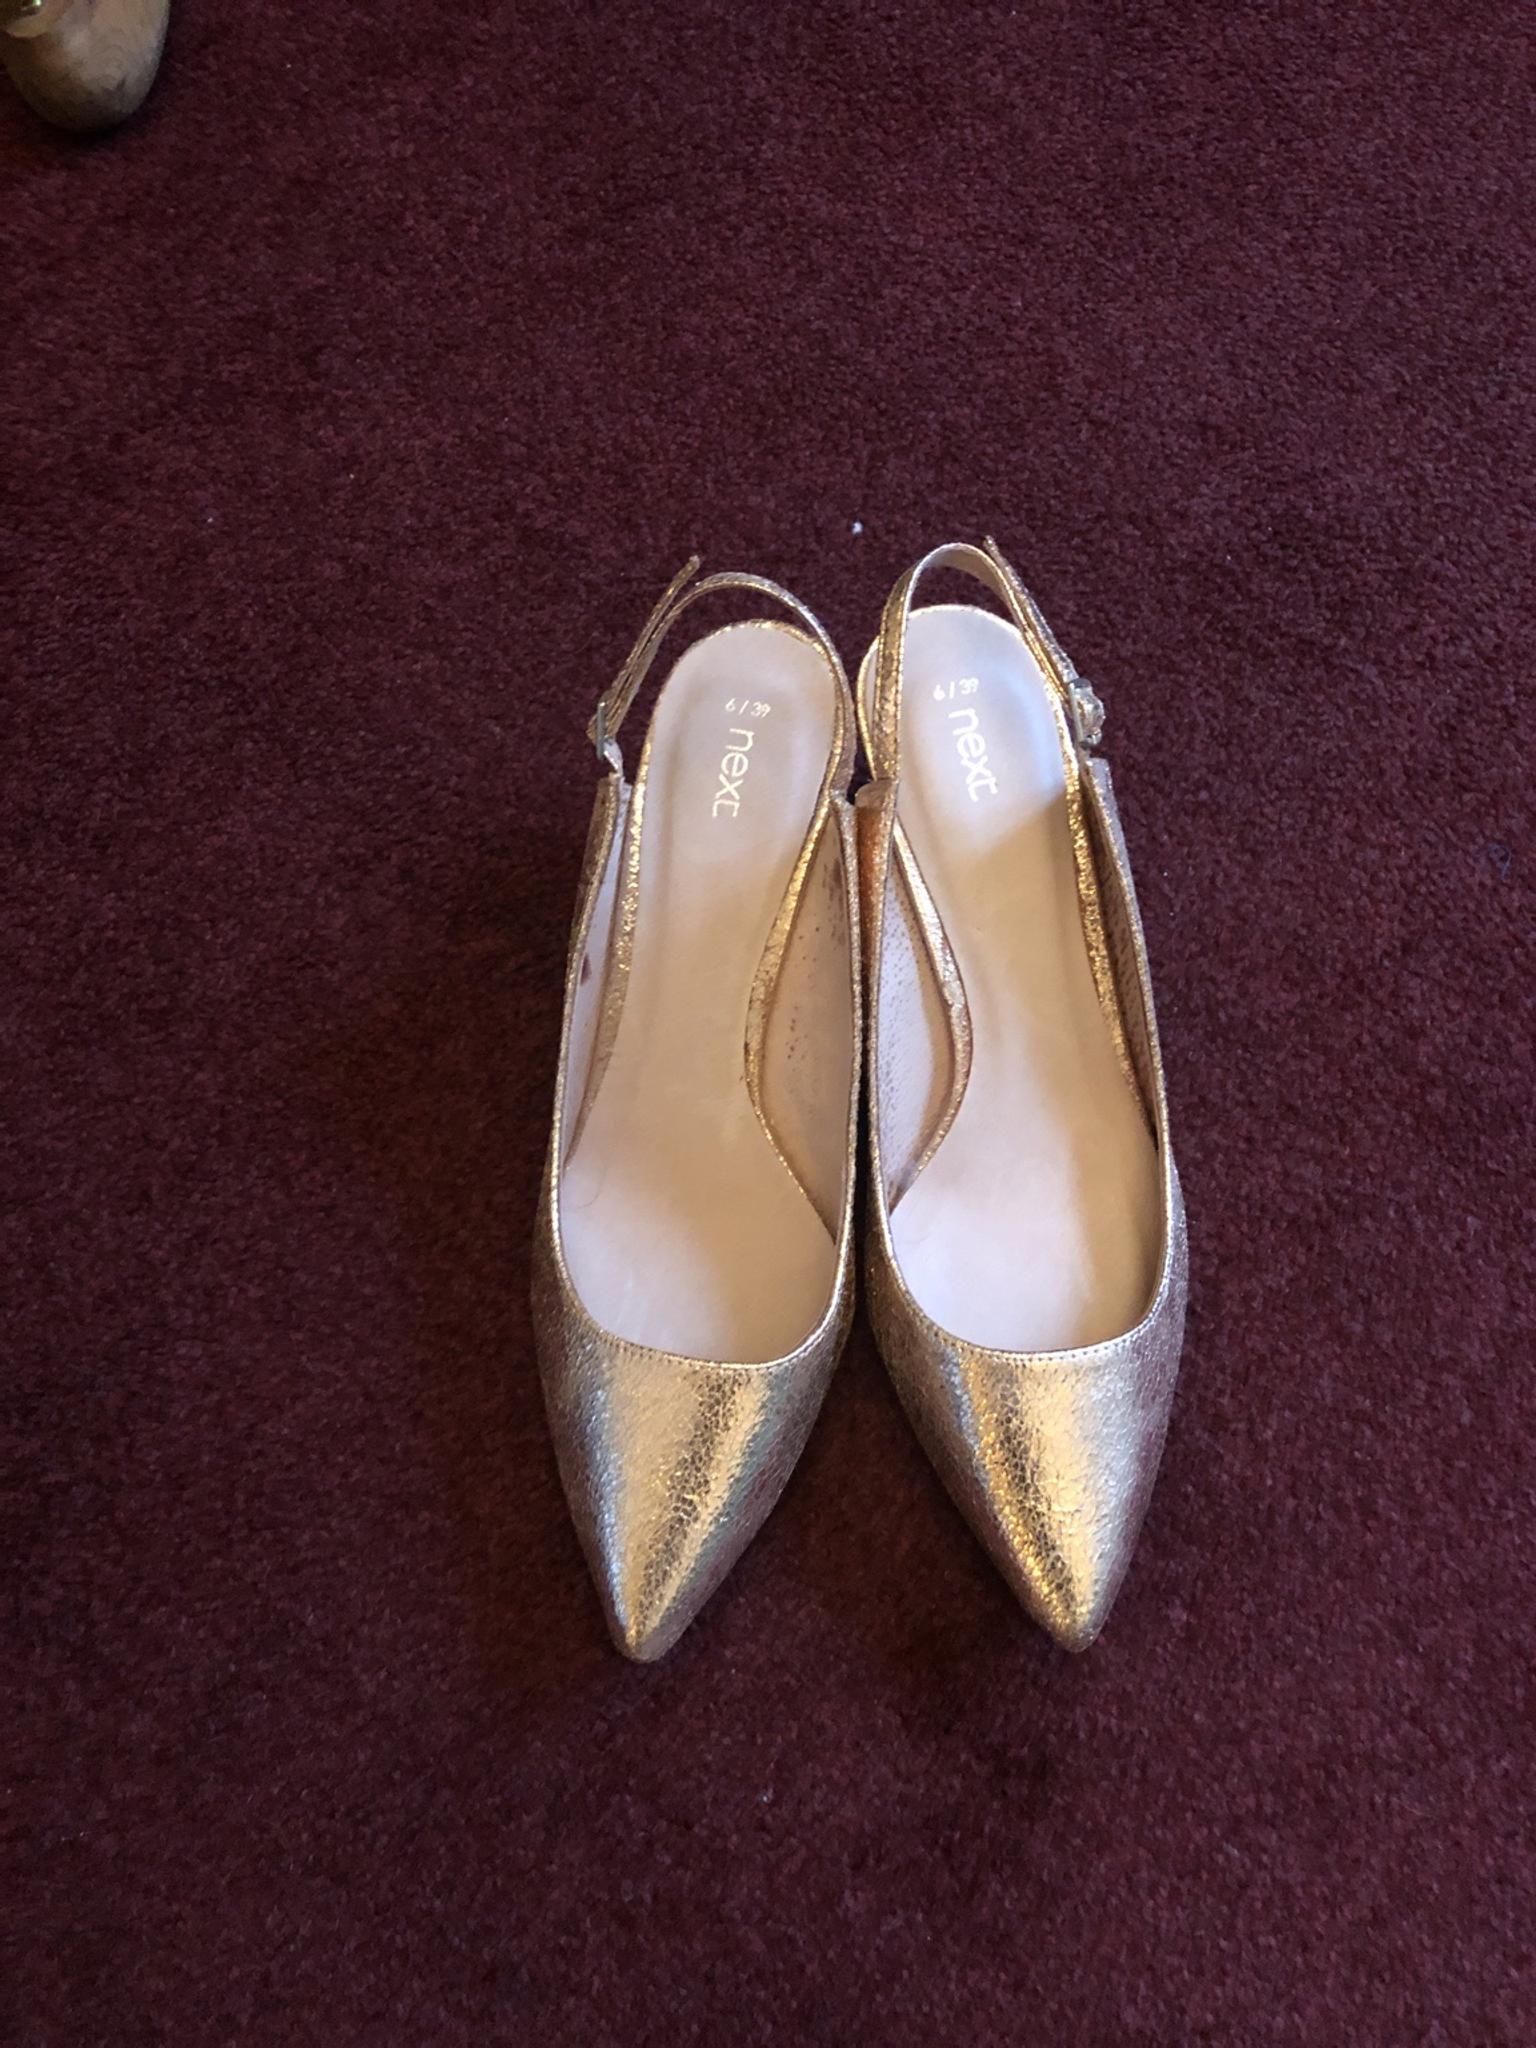 gold shoes size 6